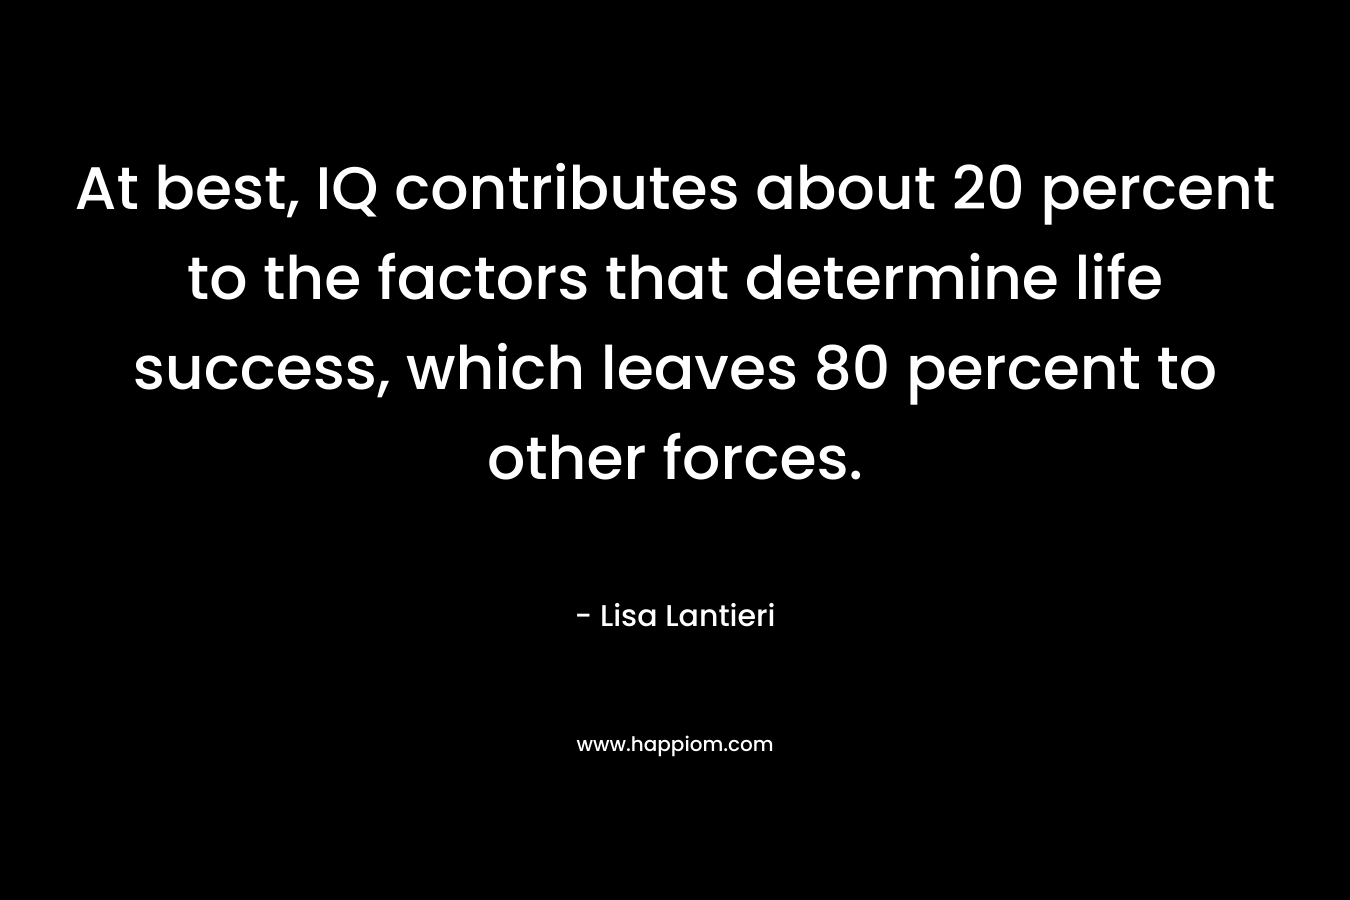 At best, IQ contributes about 20 percent to the factors that determine life success, which leaves 80 percent to other forces. – Lisa Lantieri